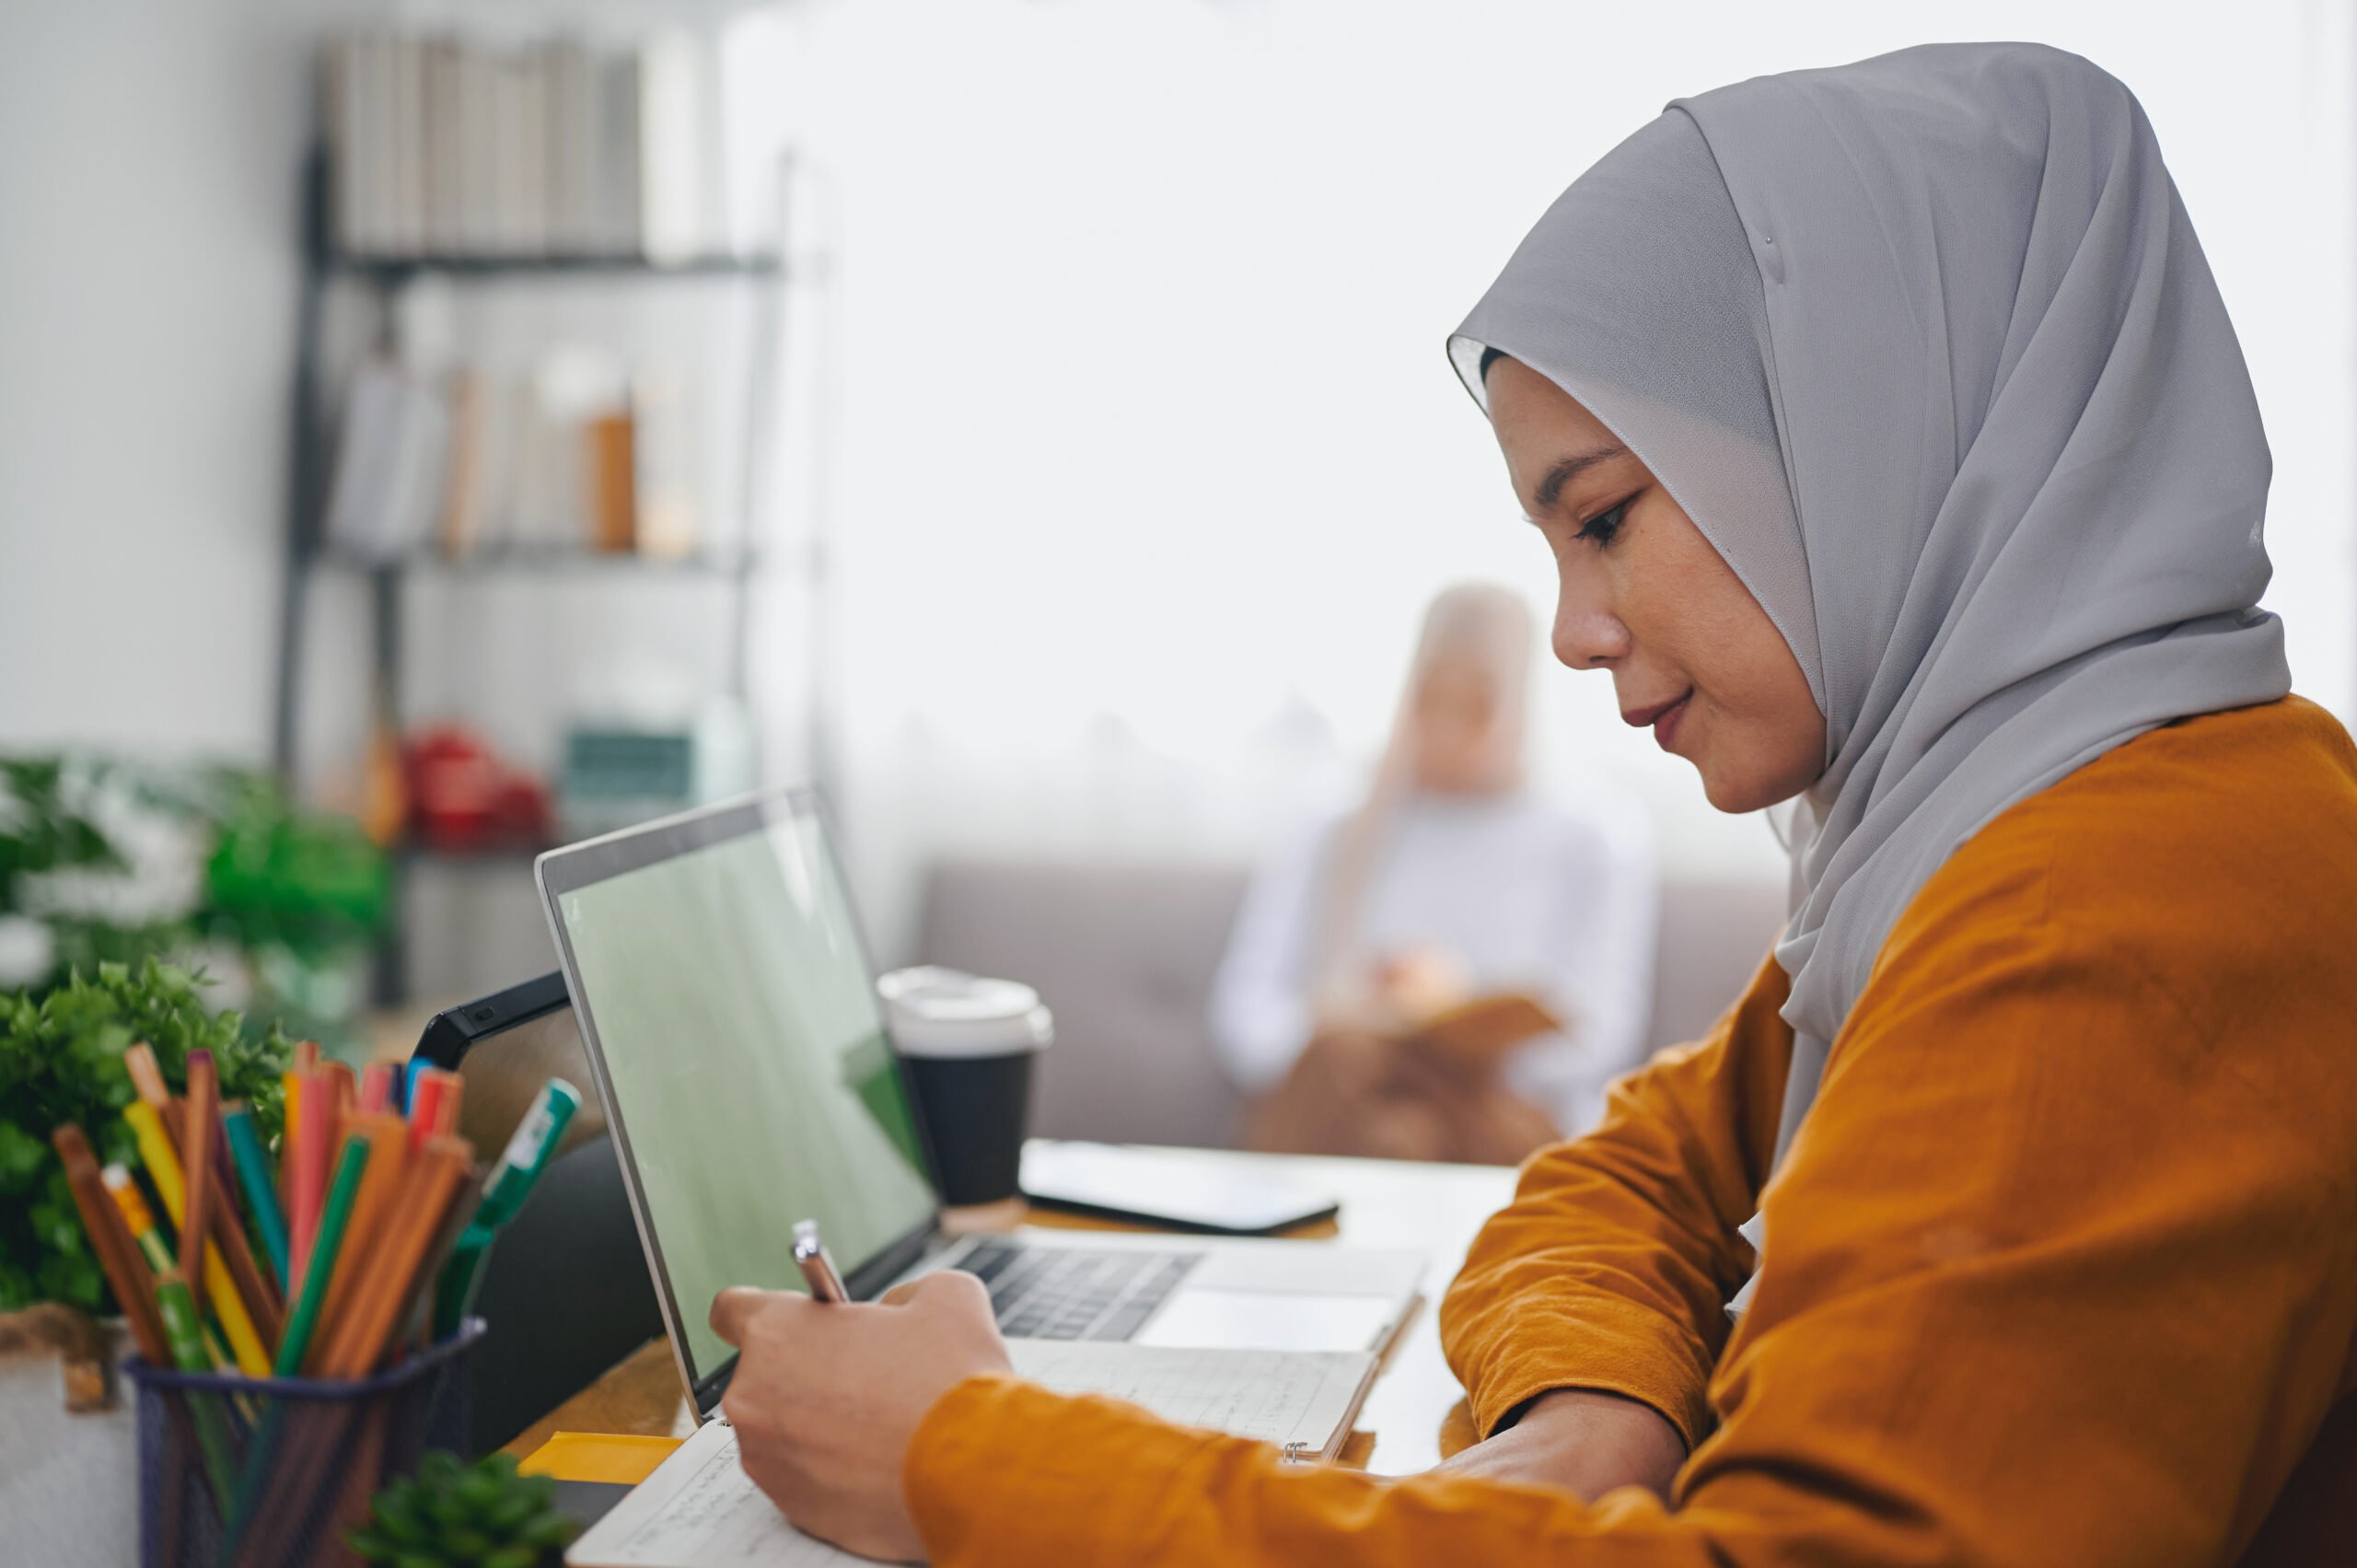 Islamic woman wearing hijab headscarf studying online with laptop at home.